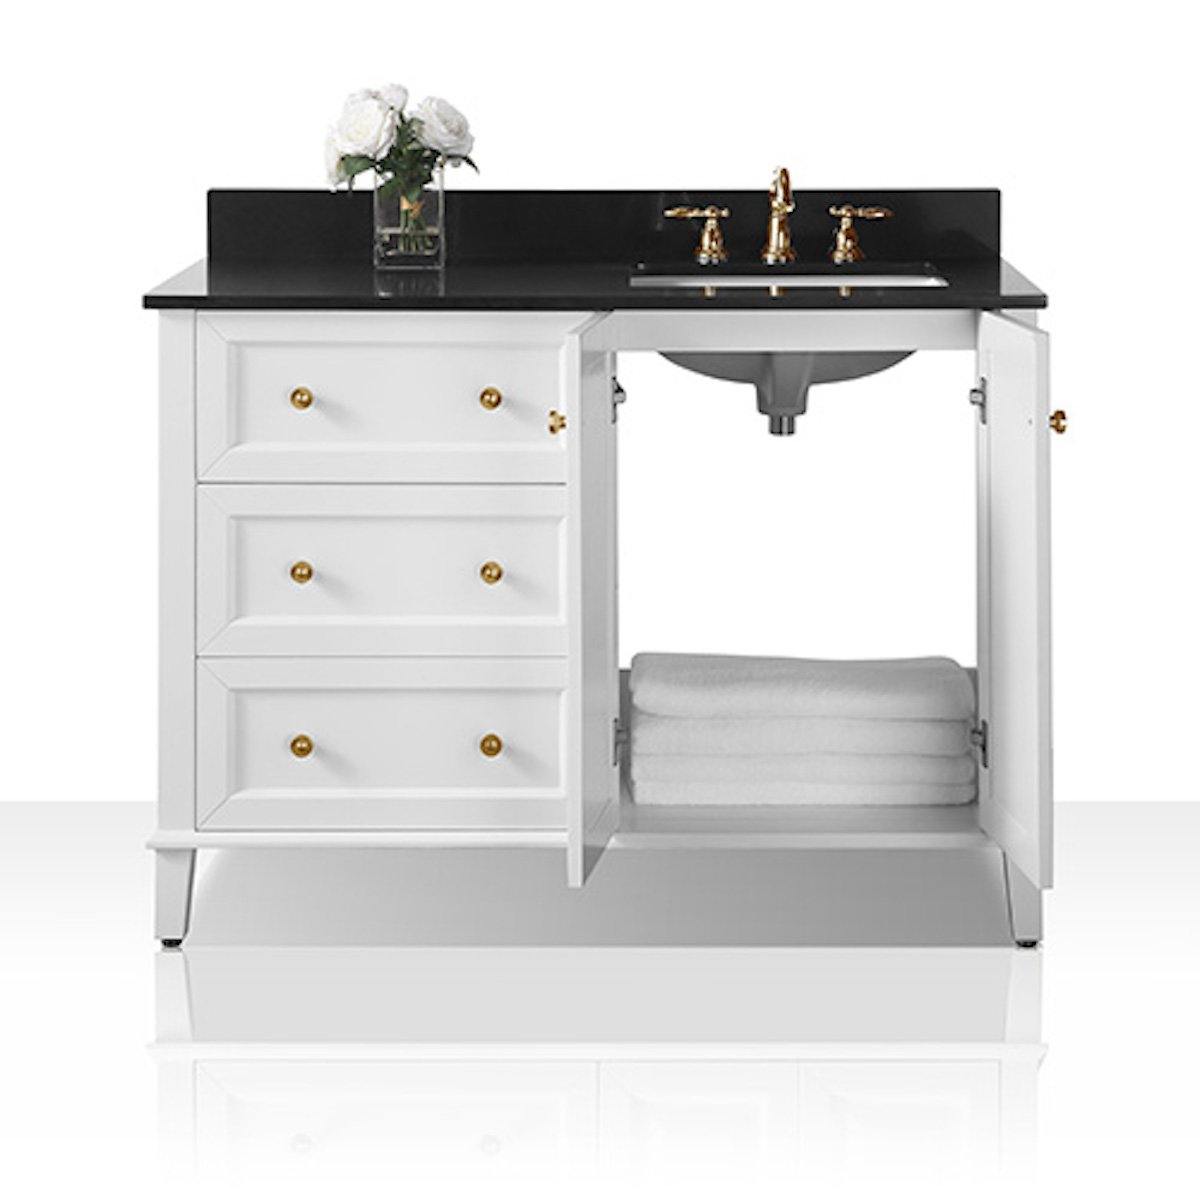 Ancerre Designs Hannah 48 Inch White Single Vanity with Right Basin and Gold Hardware Open Cabinet